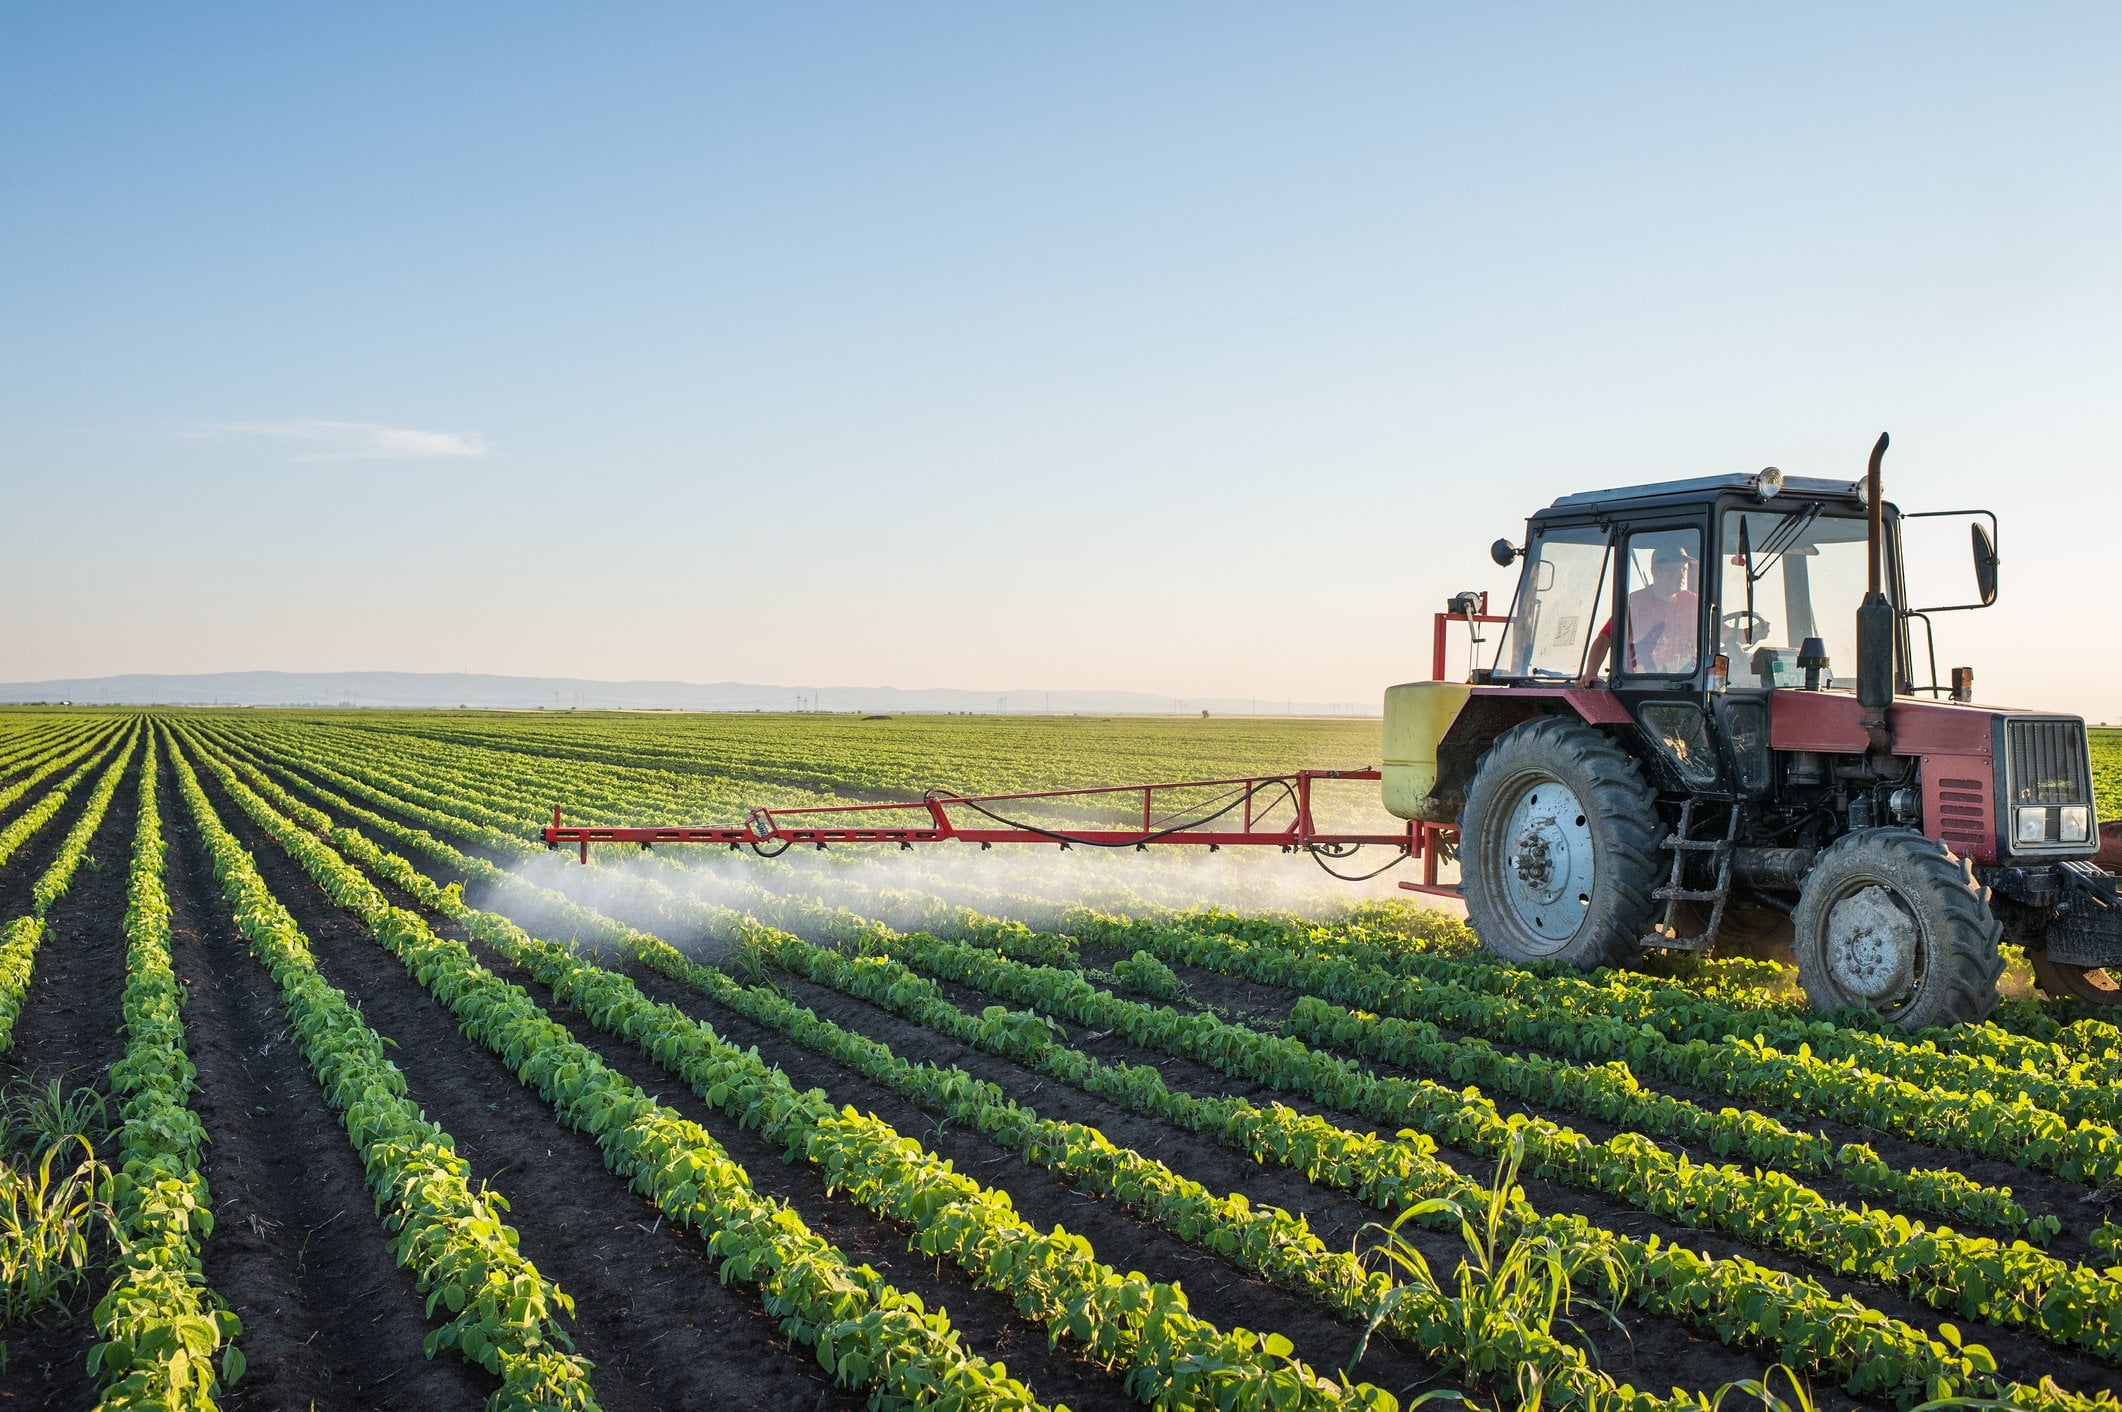 Fertilizer & Pesticide Runoff can Affect Your Water Supply